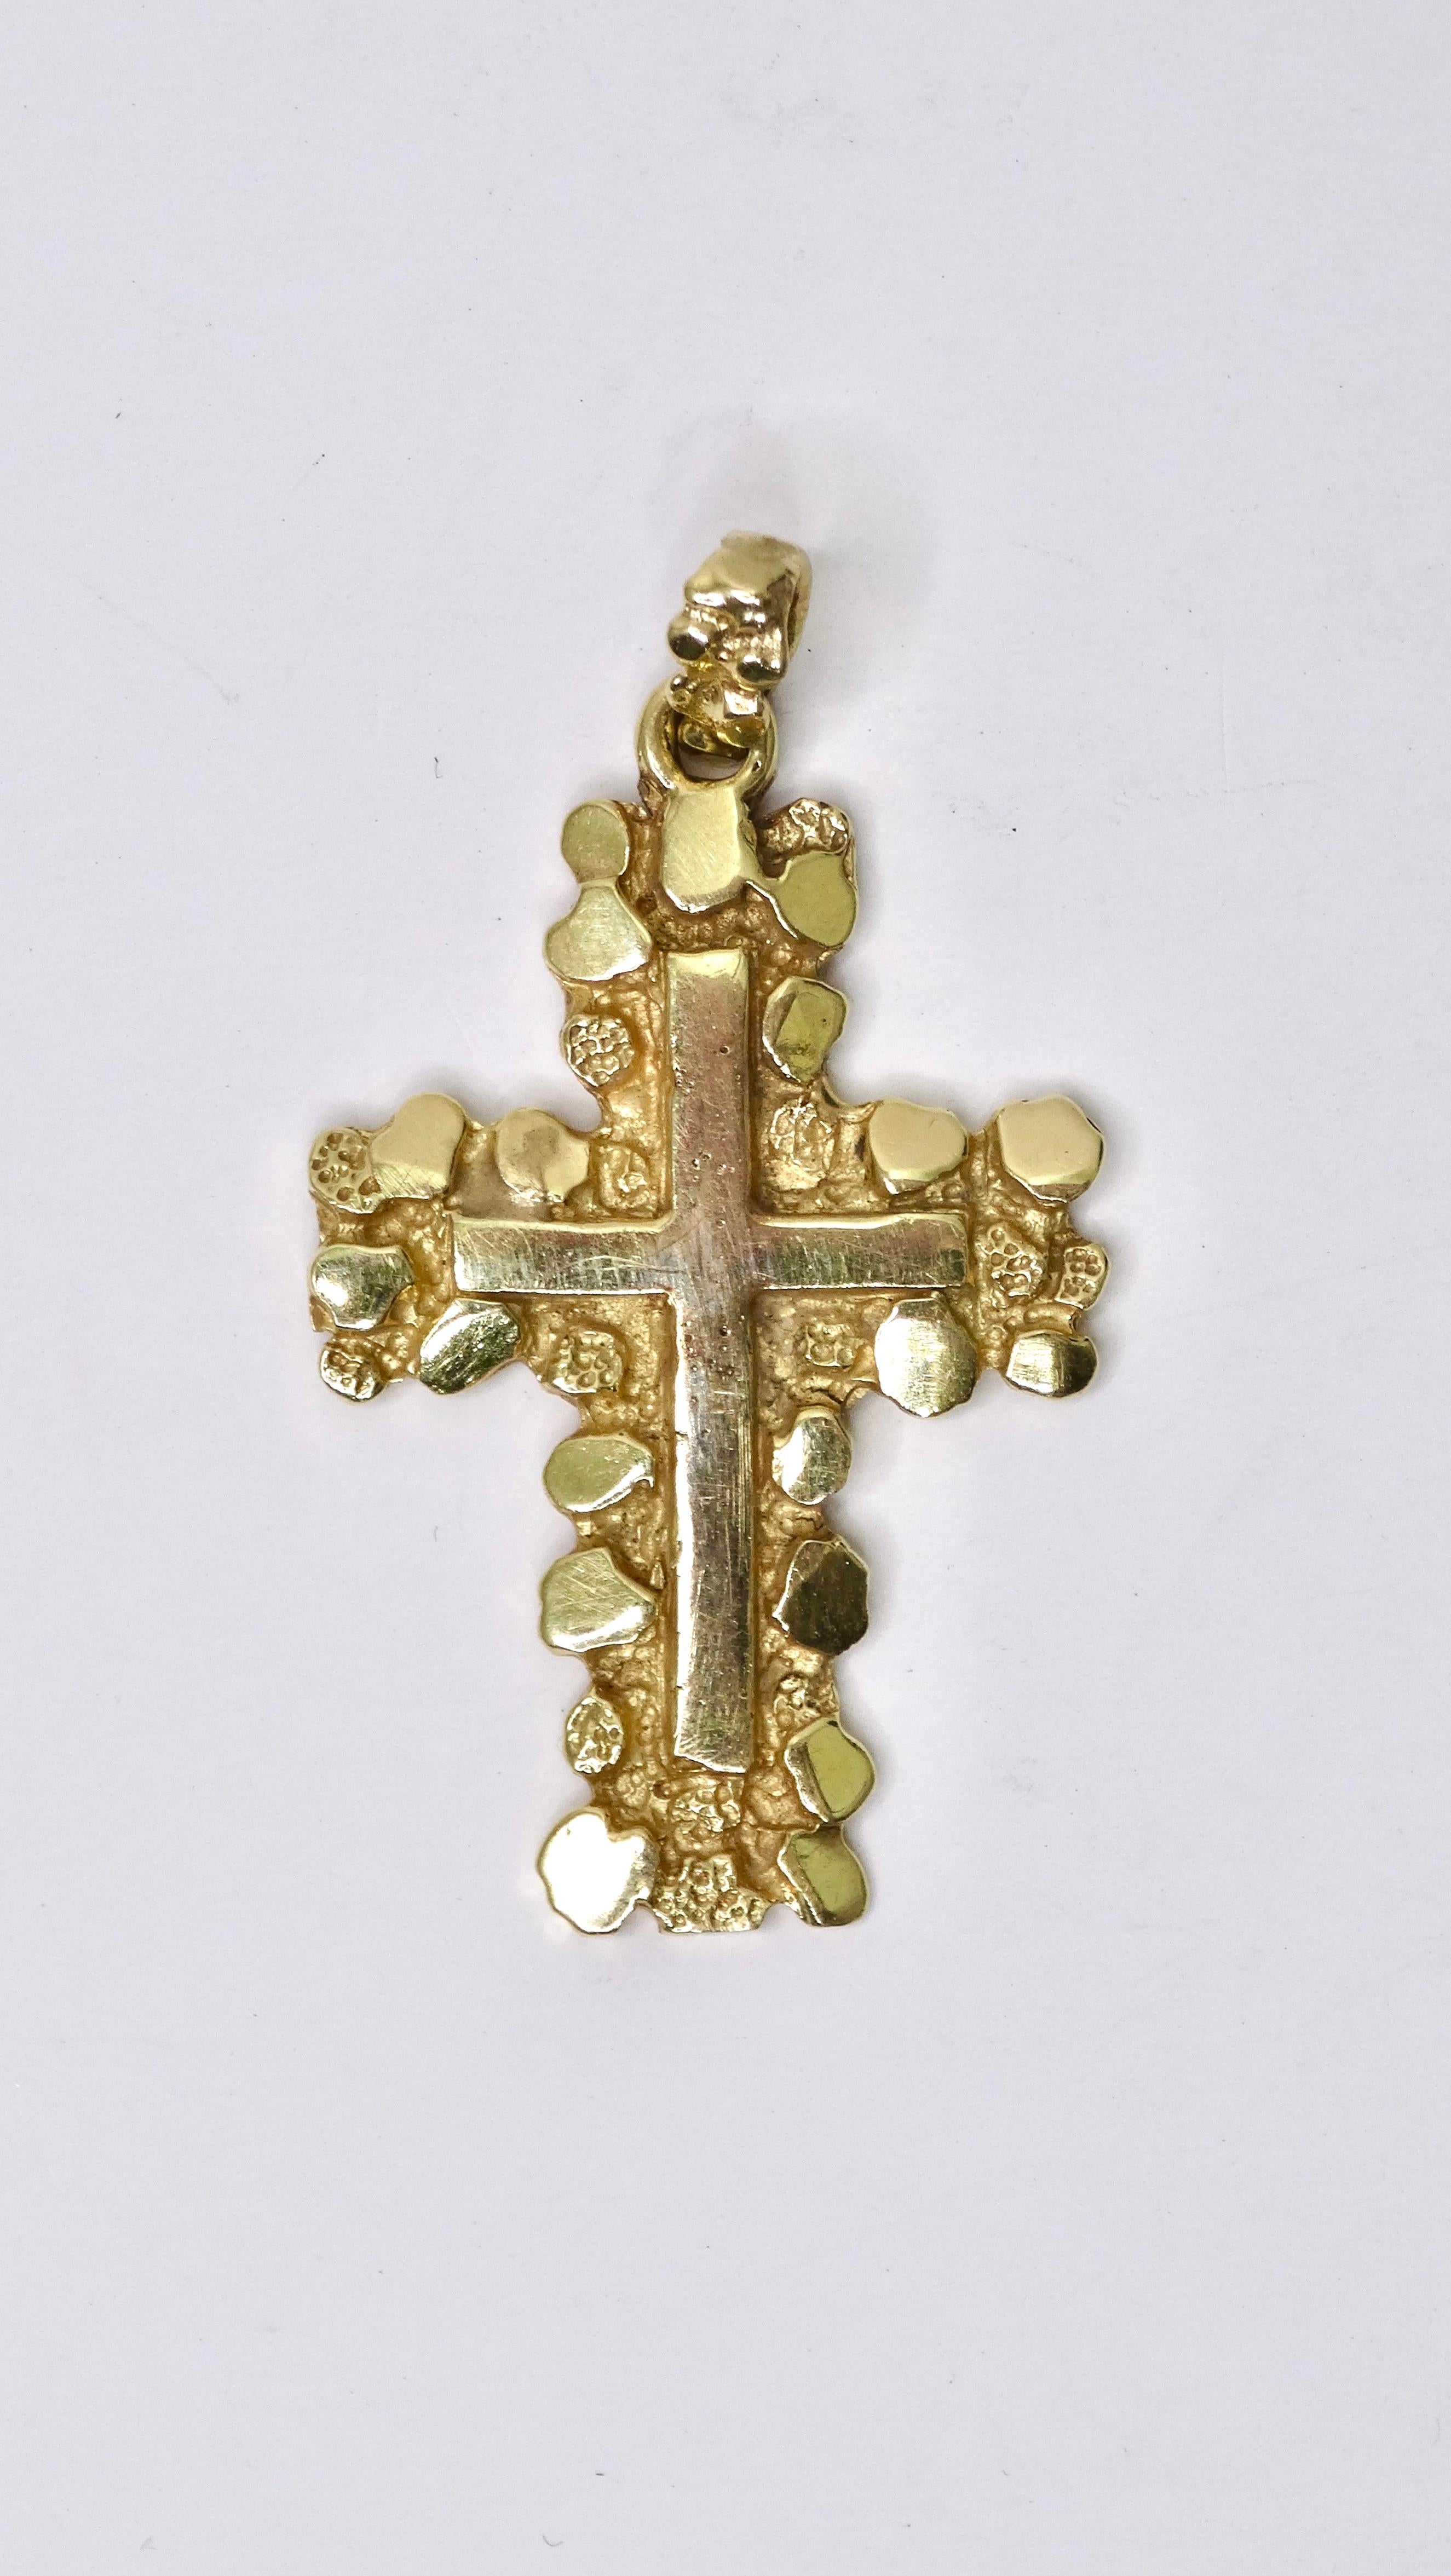 Feel confident and powerful in this 14k gold necklace enhancer! This necklace pendant is incredibly detailed with super detailed engravings that will draw you in. This has an interesting textured and pebbled effect complimented by a smooth cross